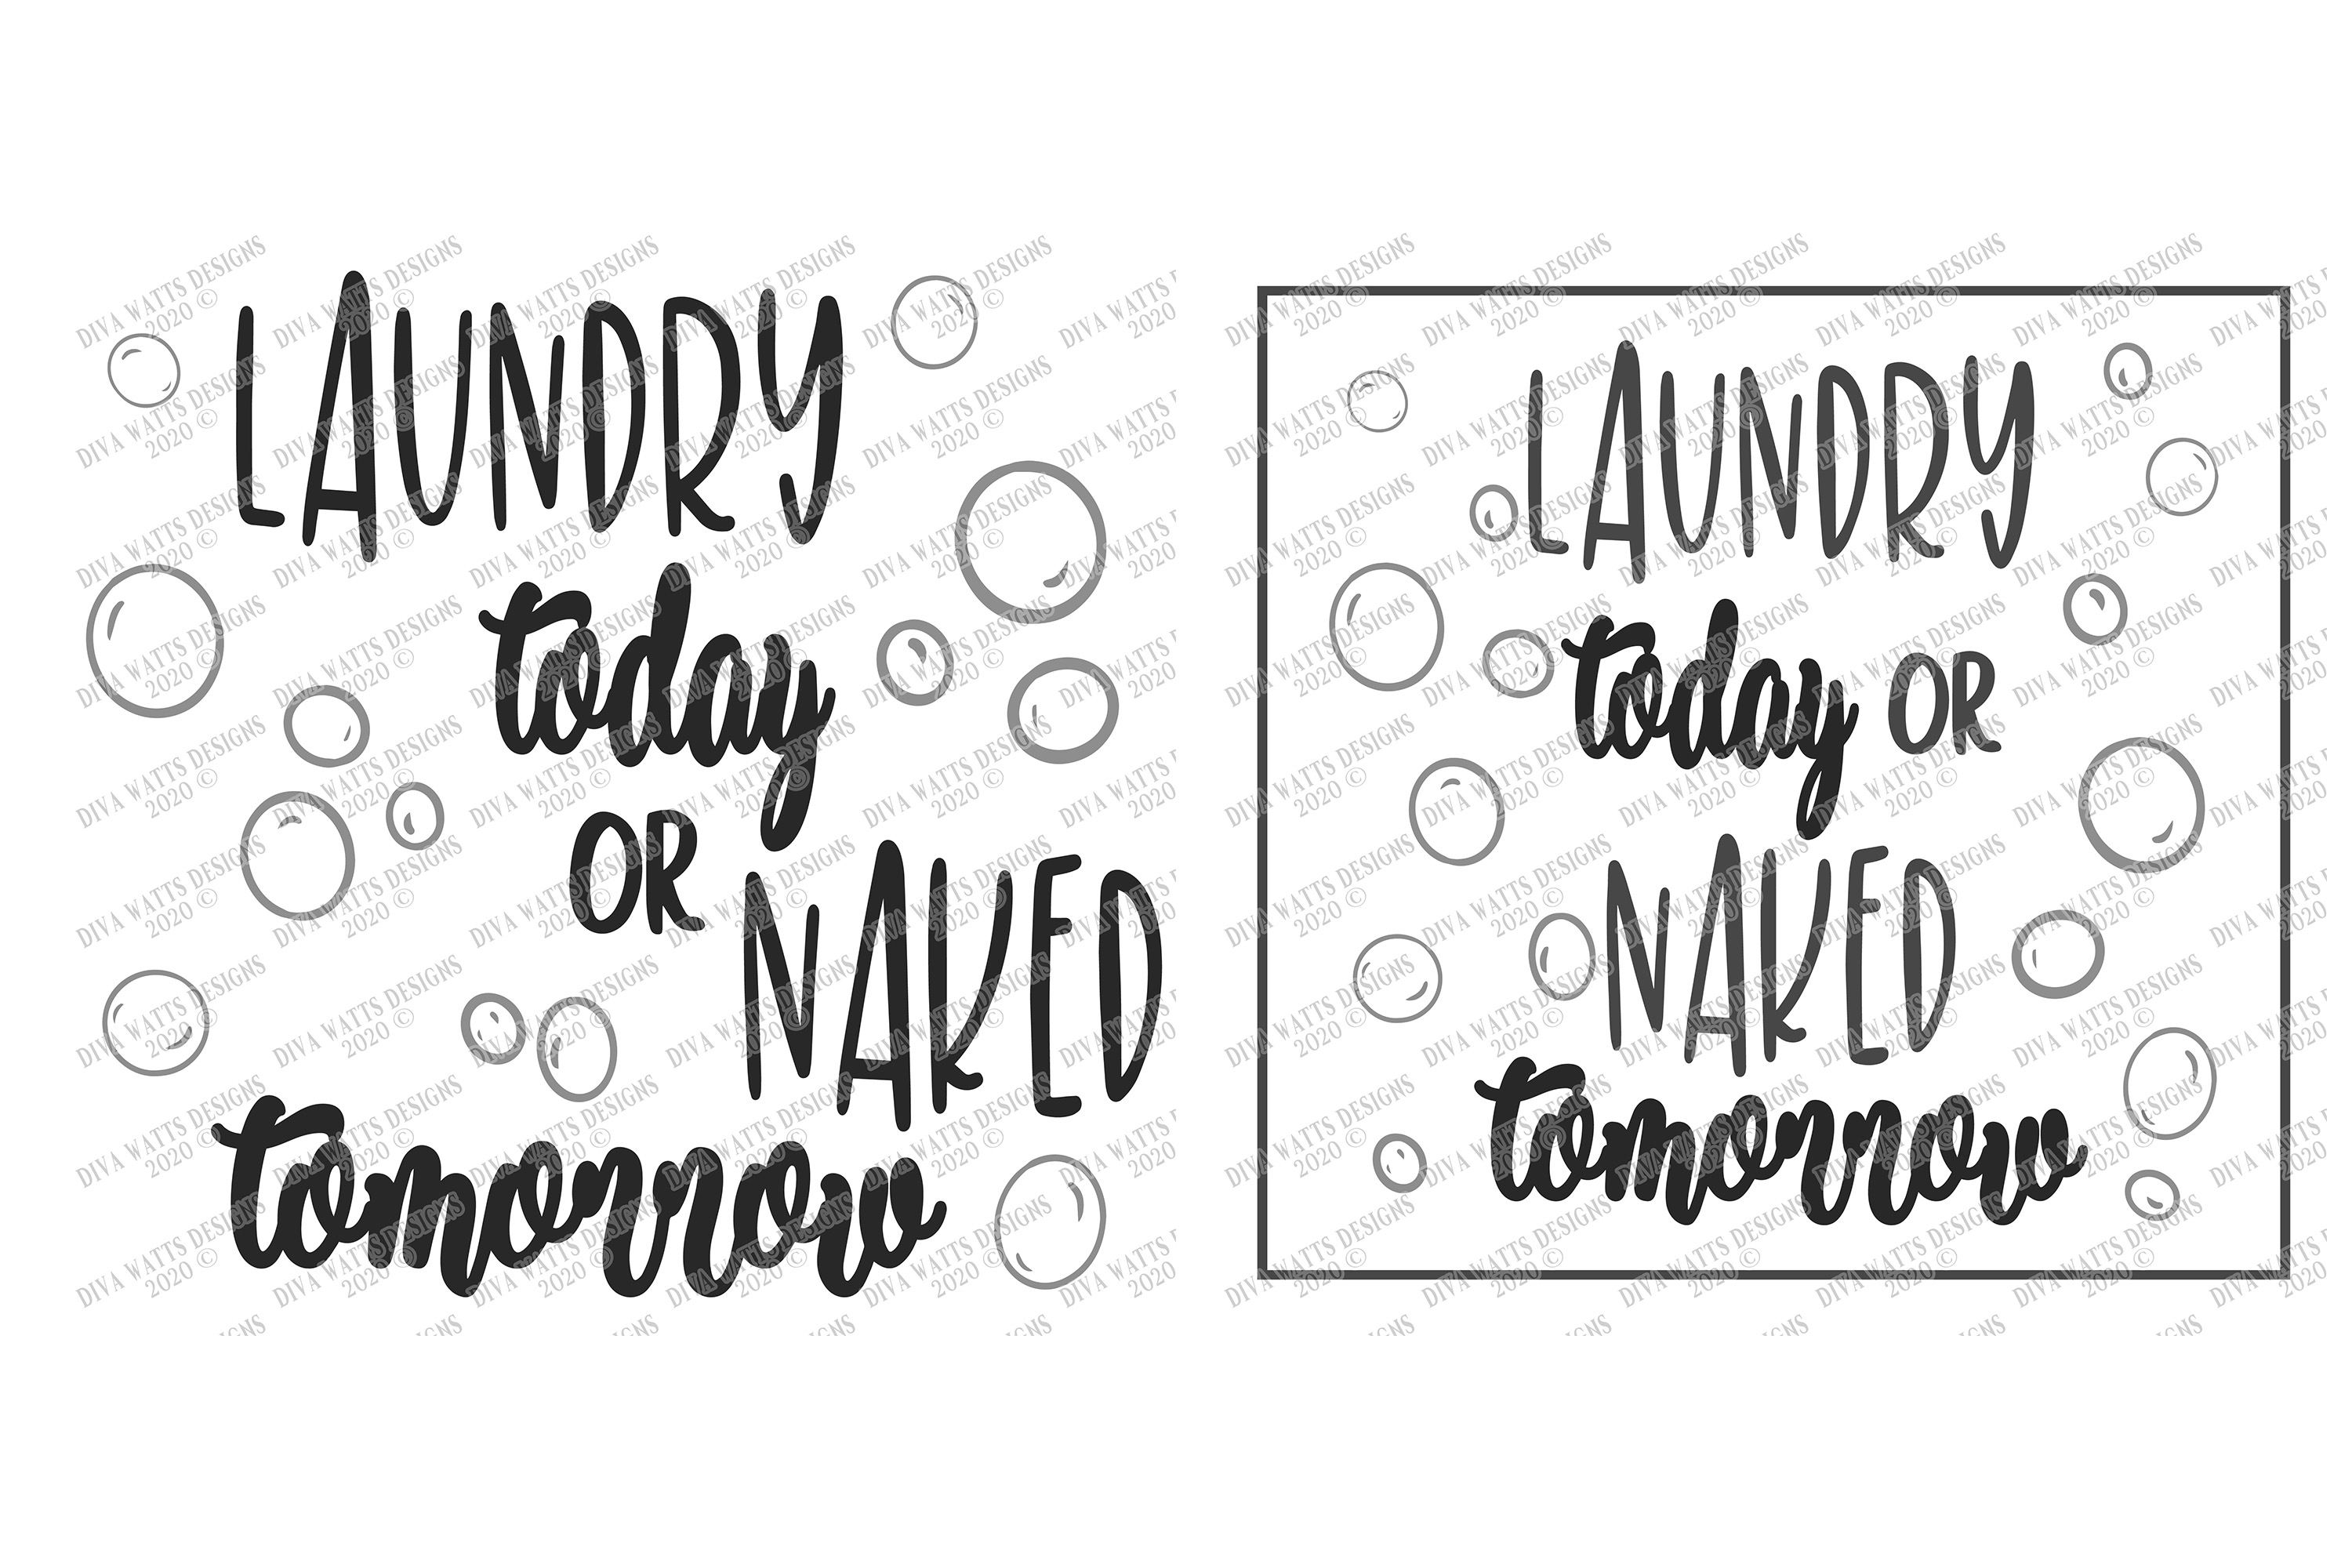 Laundry Today or Naked Tomorrow Laundry Room Sign (270695 